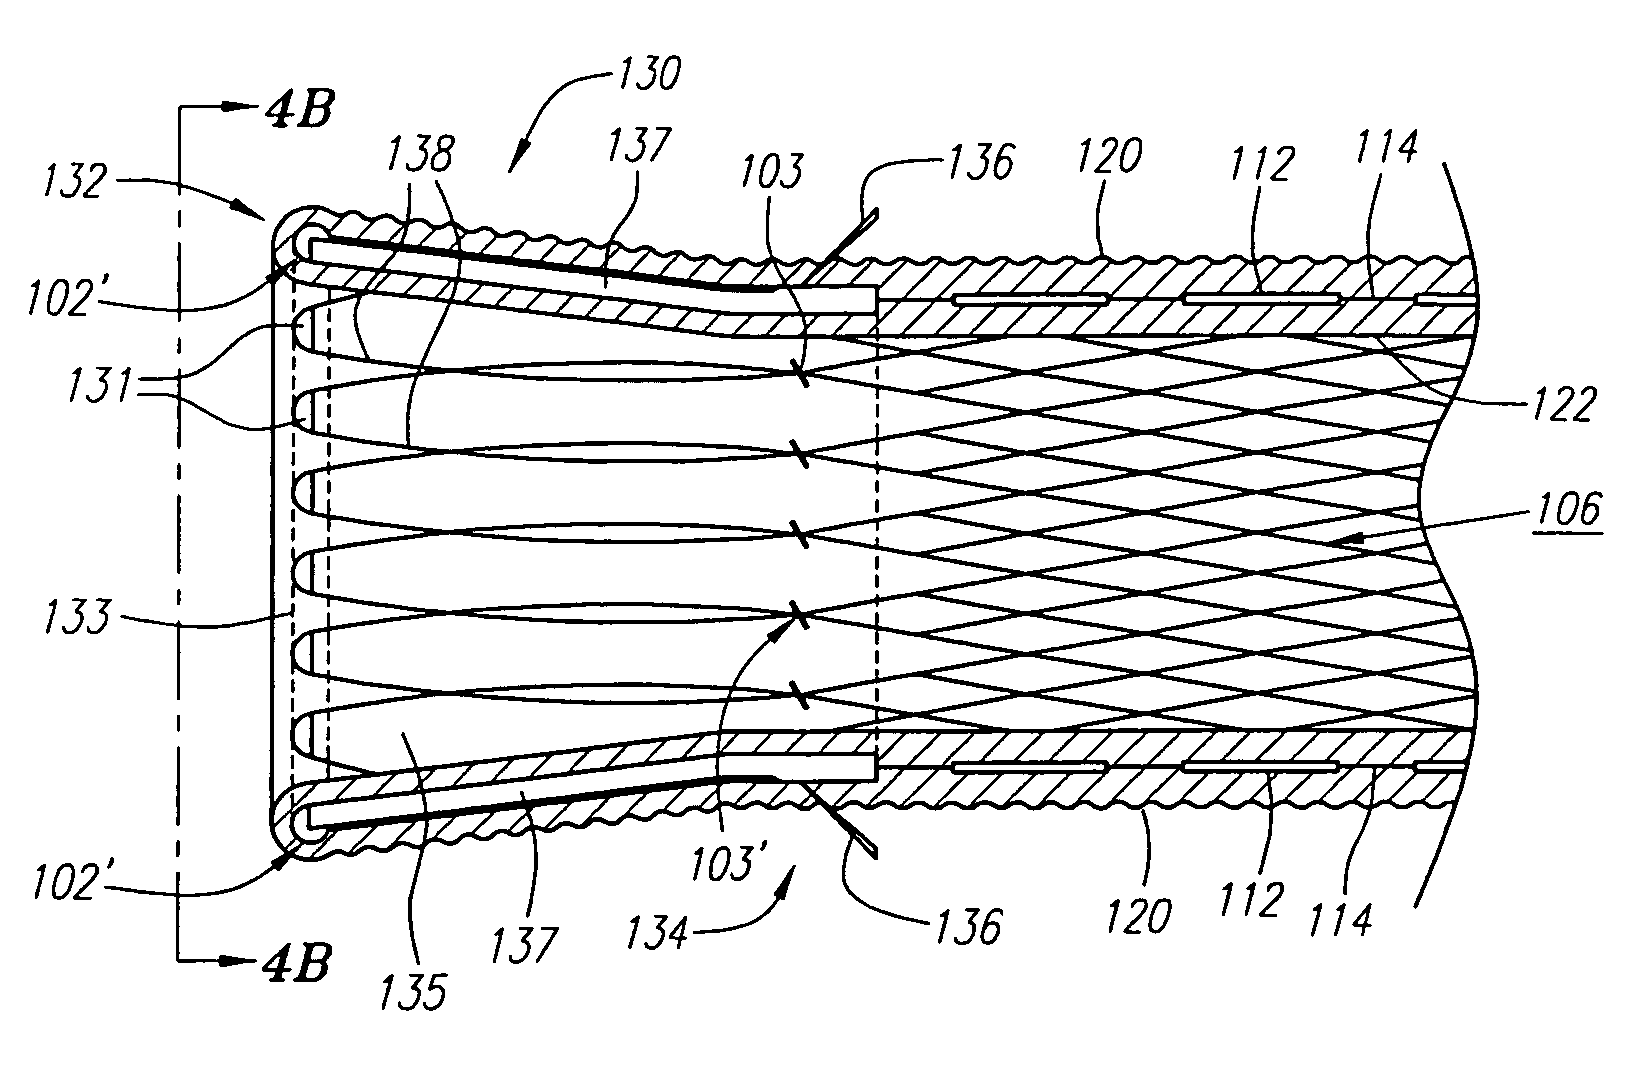 Methods for forming and fabricating textured and drug eluting coronary artery stent